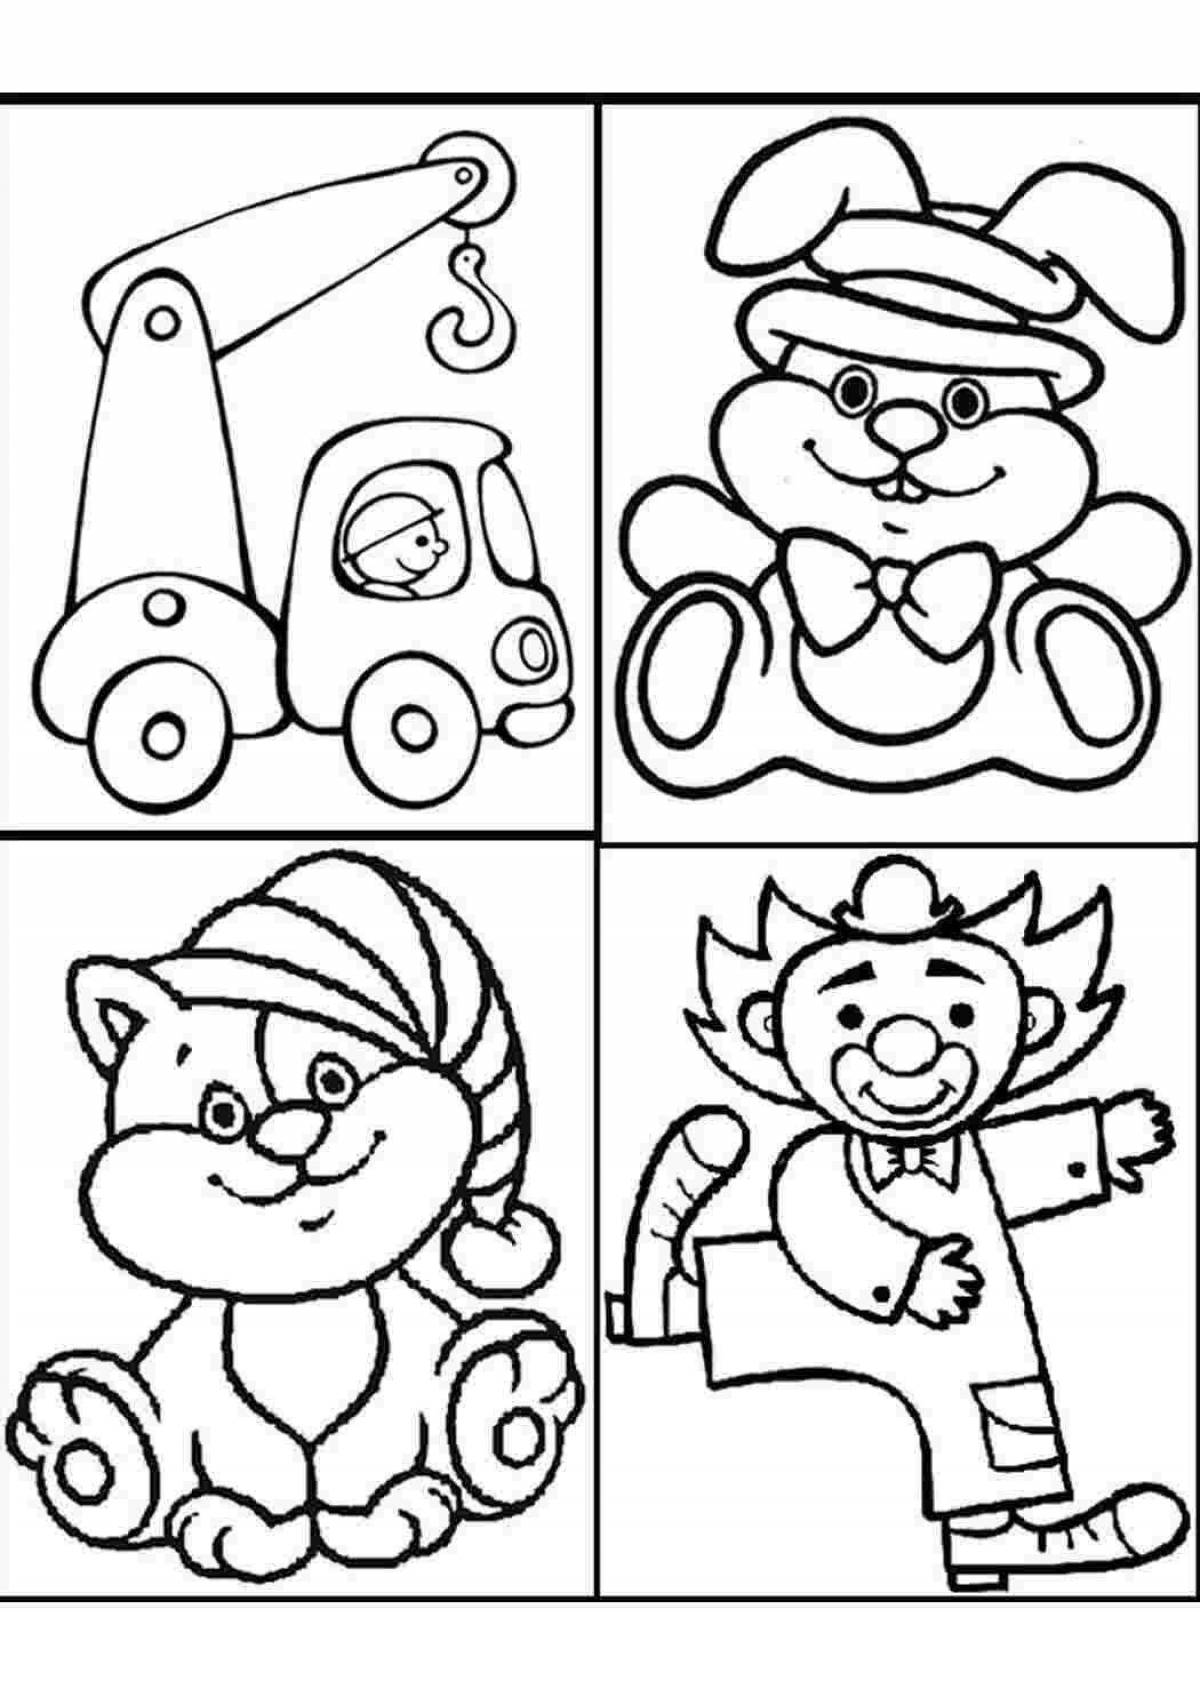 Crazy coloring book for kids